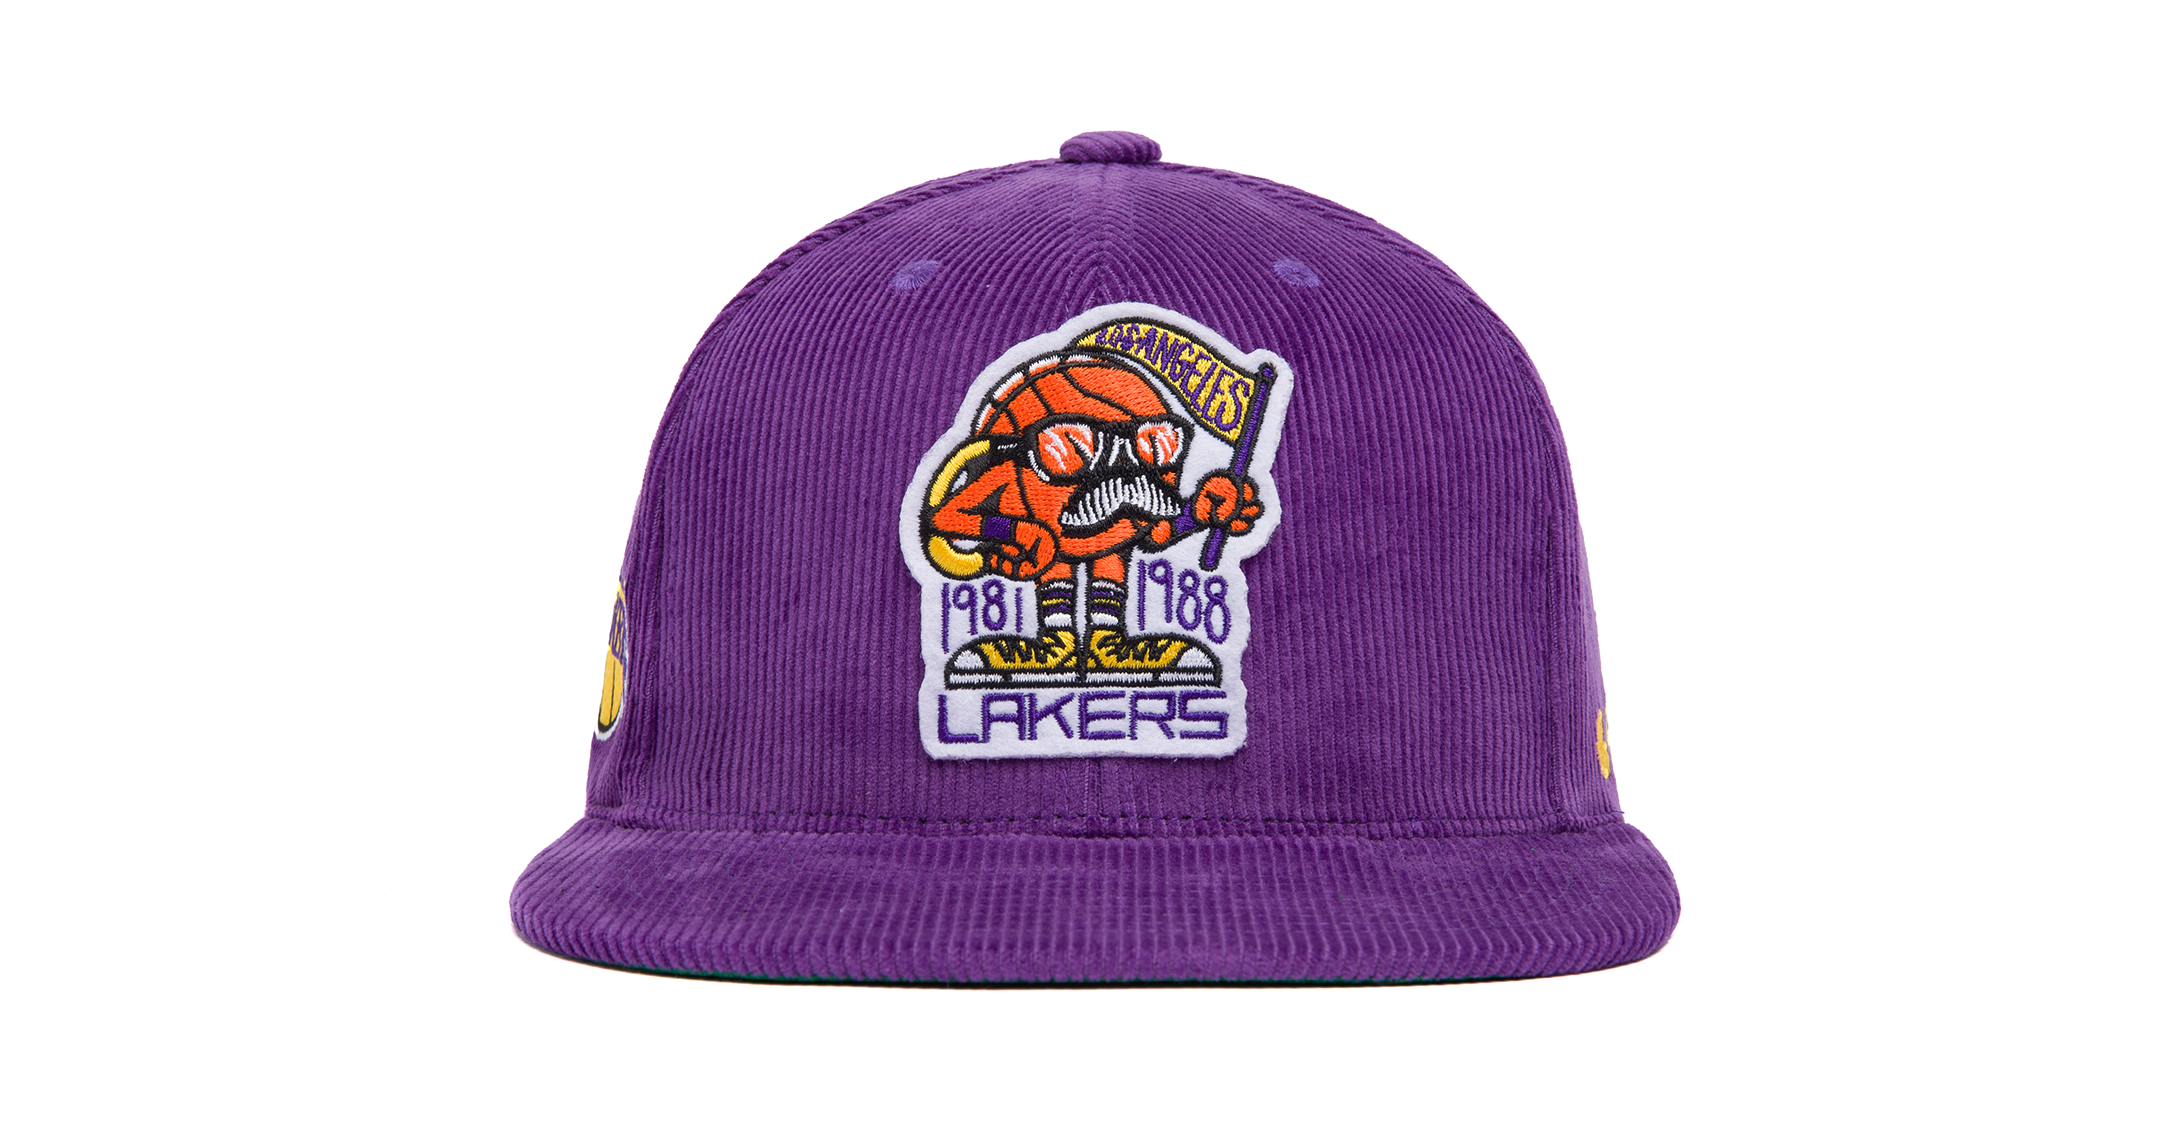 Los Angeles Lakers Cool Grey 3 Snapback Grey - Mitchell & Ness cap